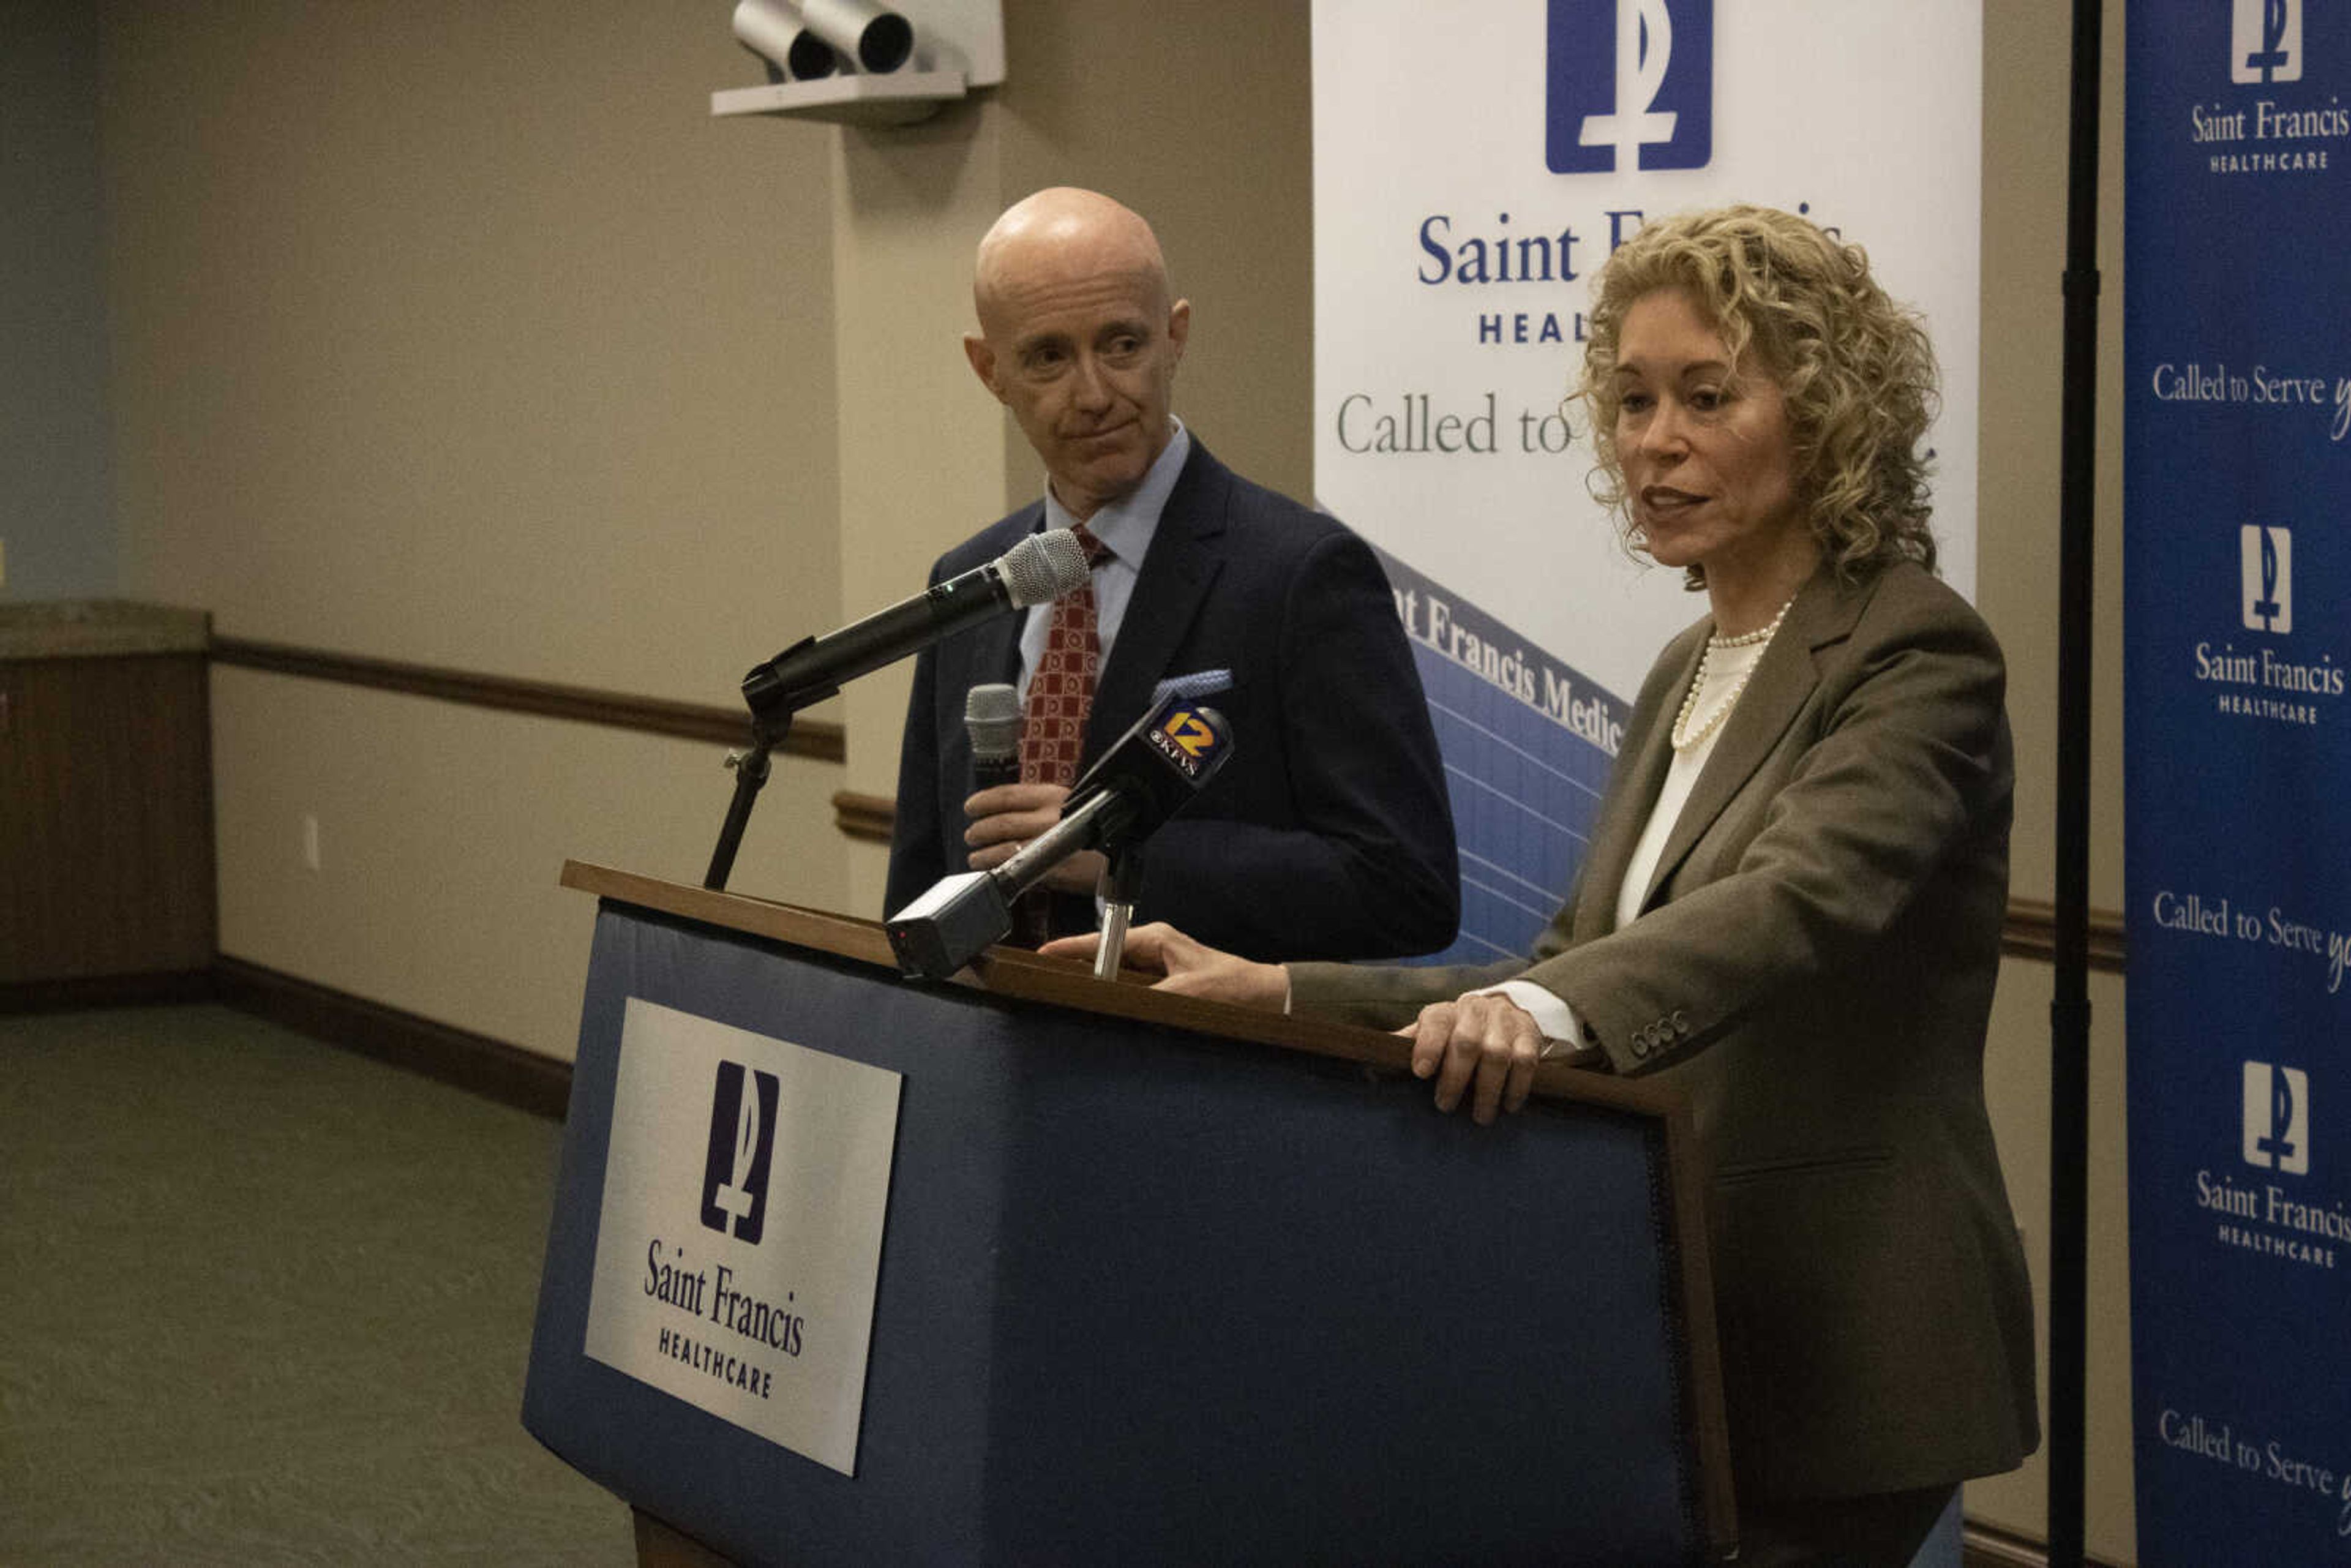 Jim Burke, left, and Maryann Reese discuss Saint Francis’ terminated contract with UnitedHealthcare at a press conference Monday, Jan. 27.